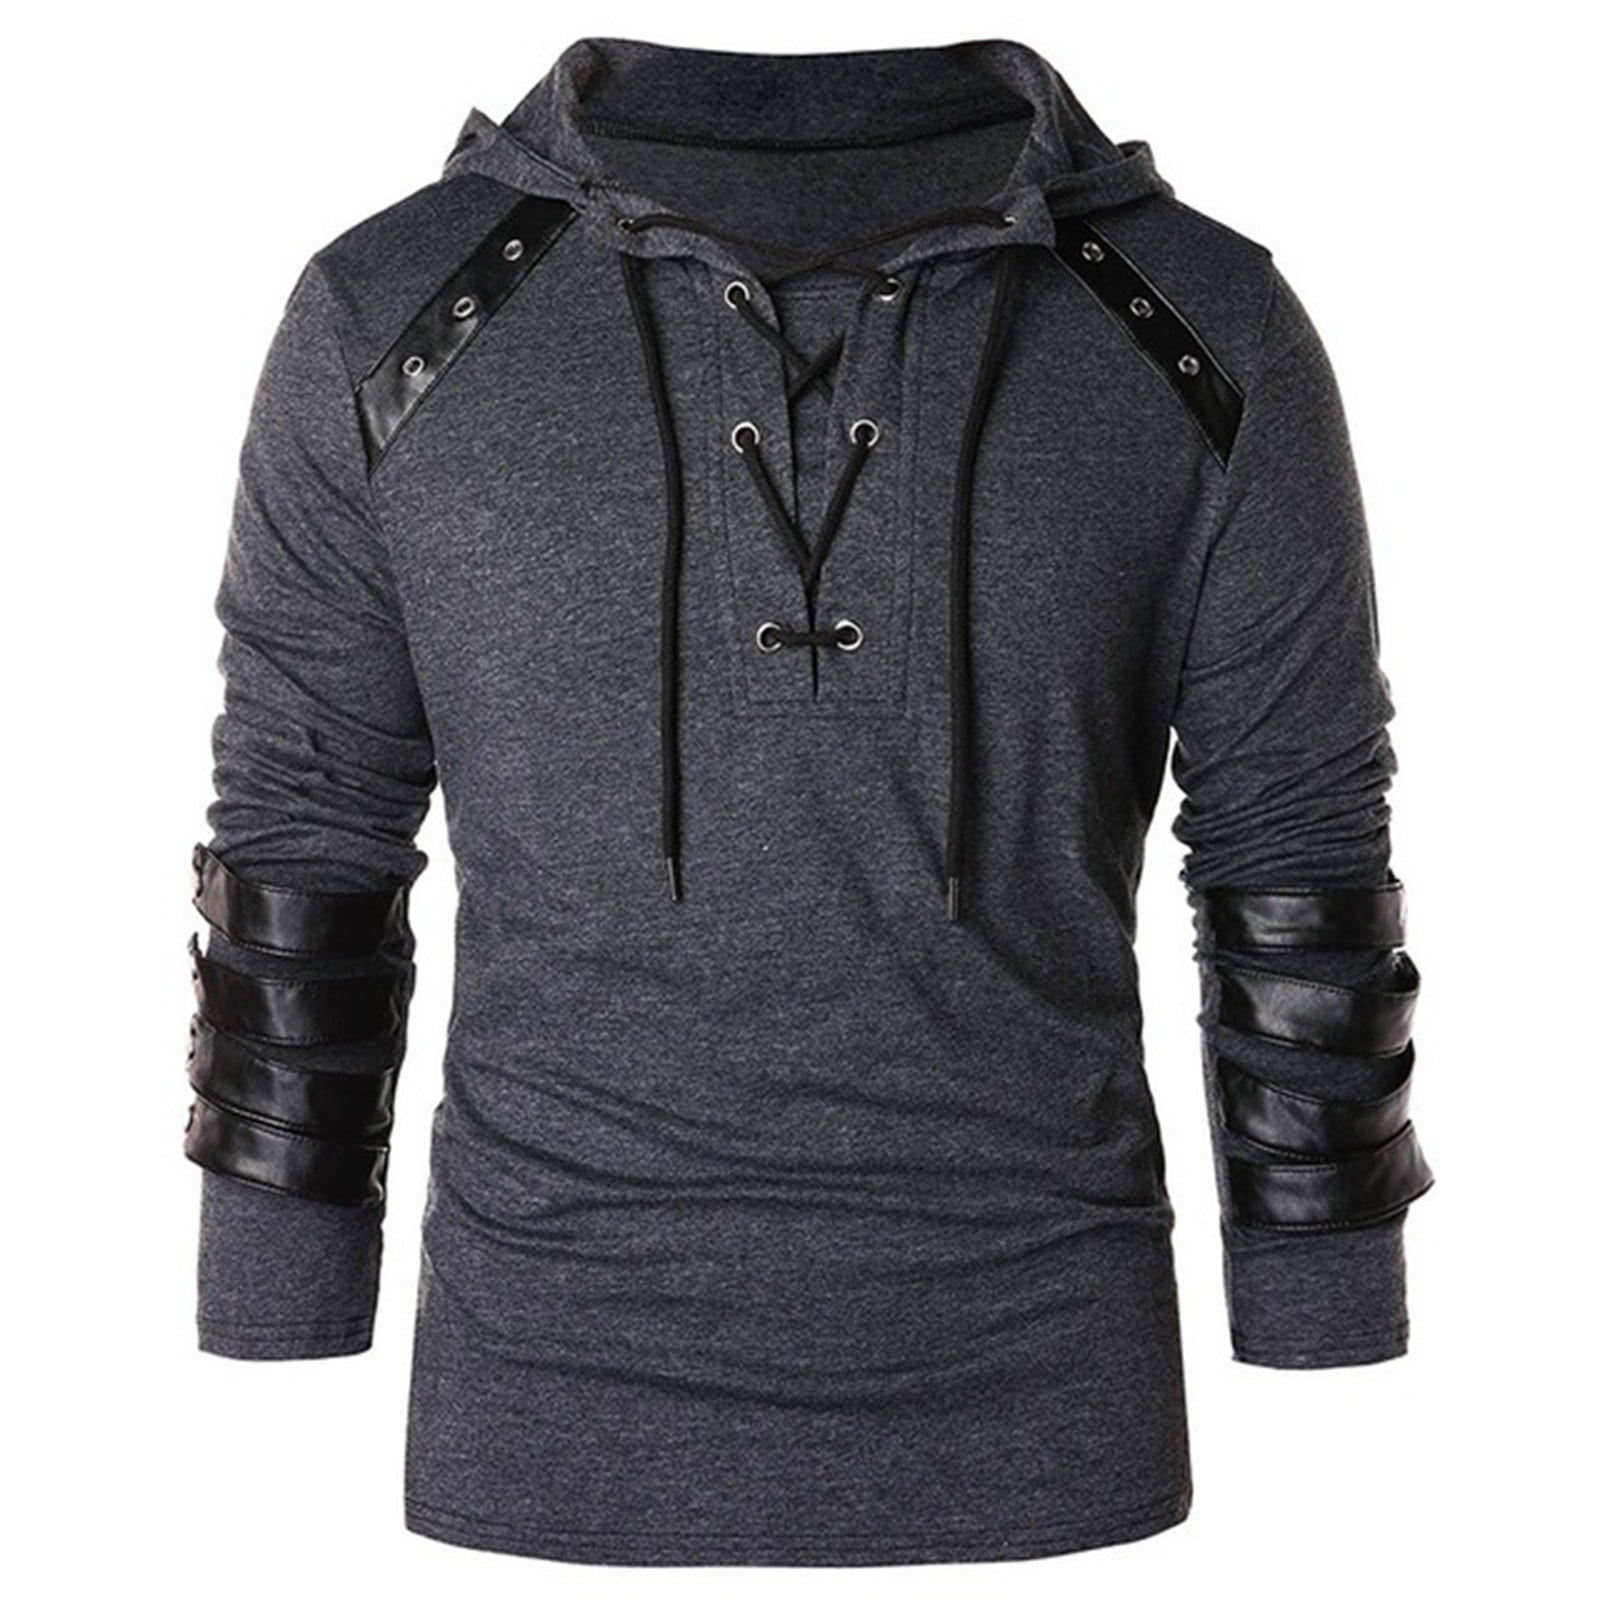 Men's Gothic Punk Hoodie,Mens Medieval Pirate Shirt Lace Up, Mens